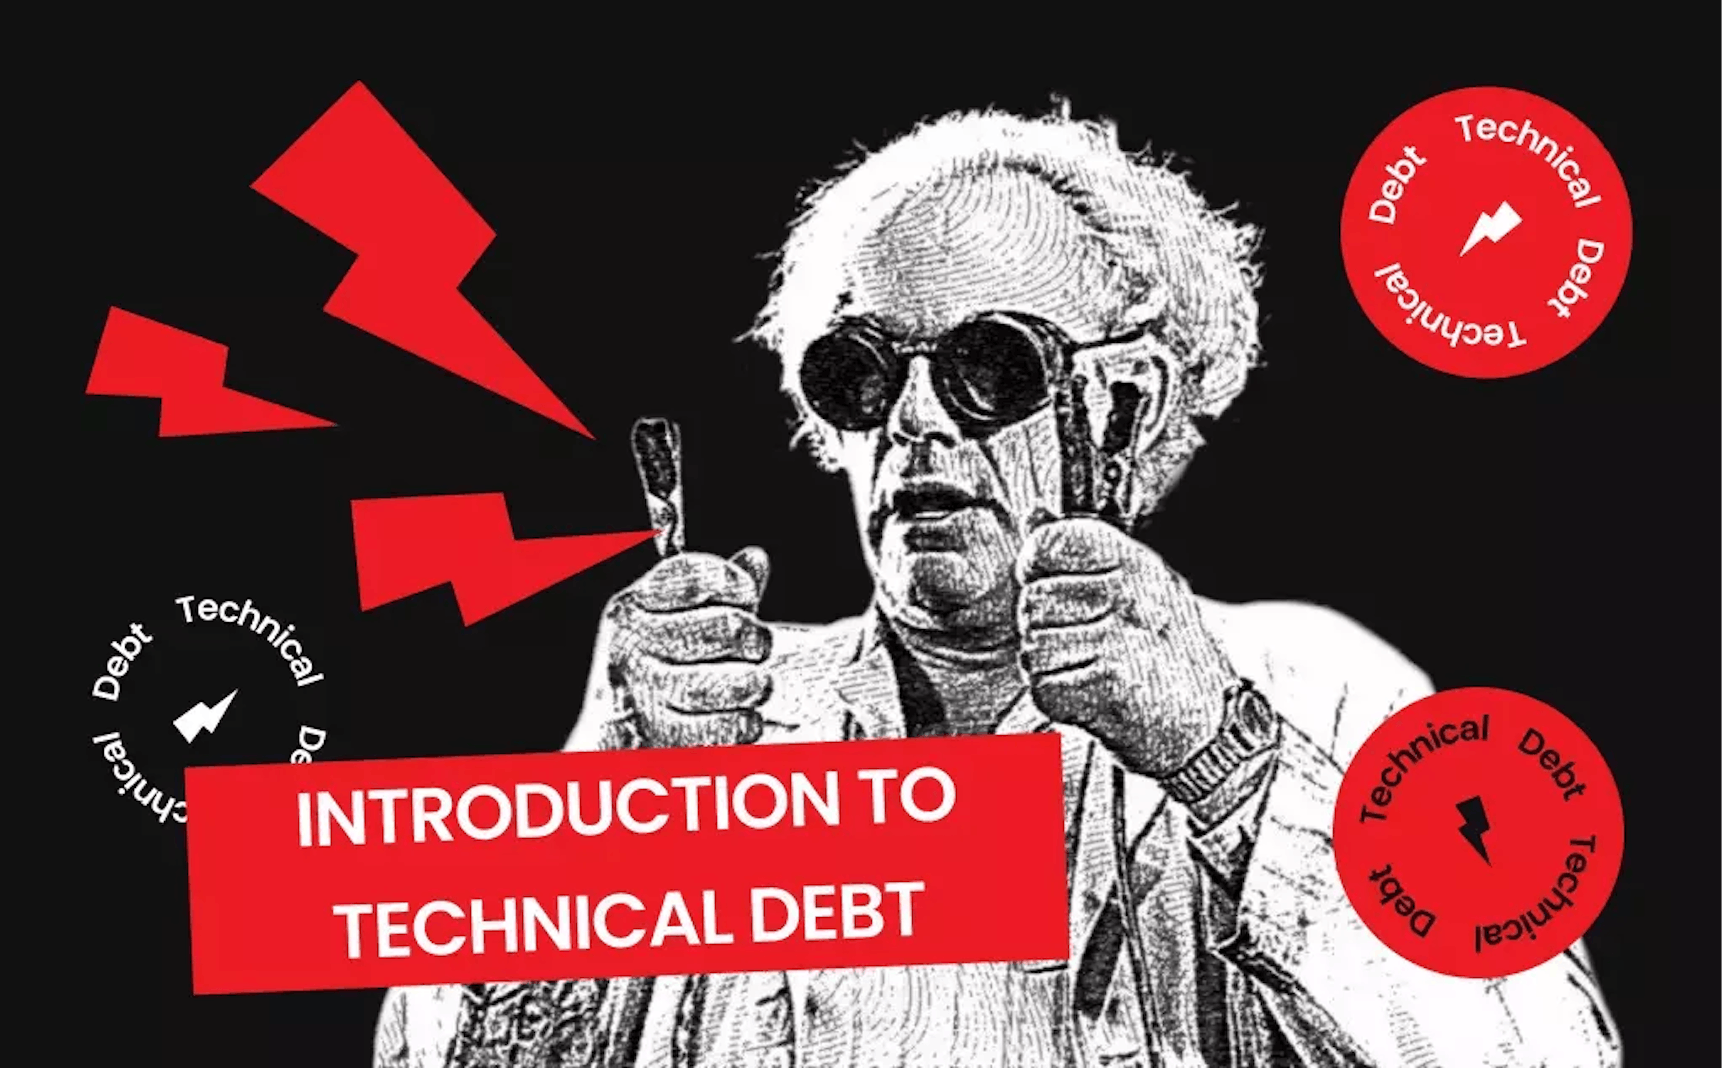 9. Introduction to Technical Debt